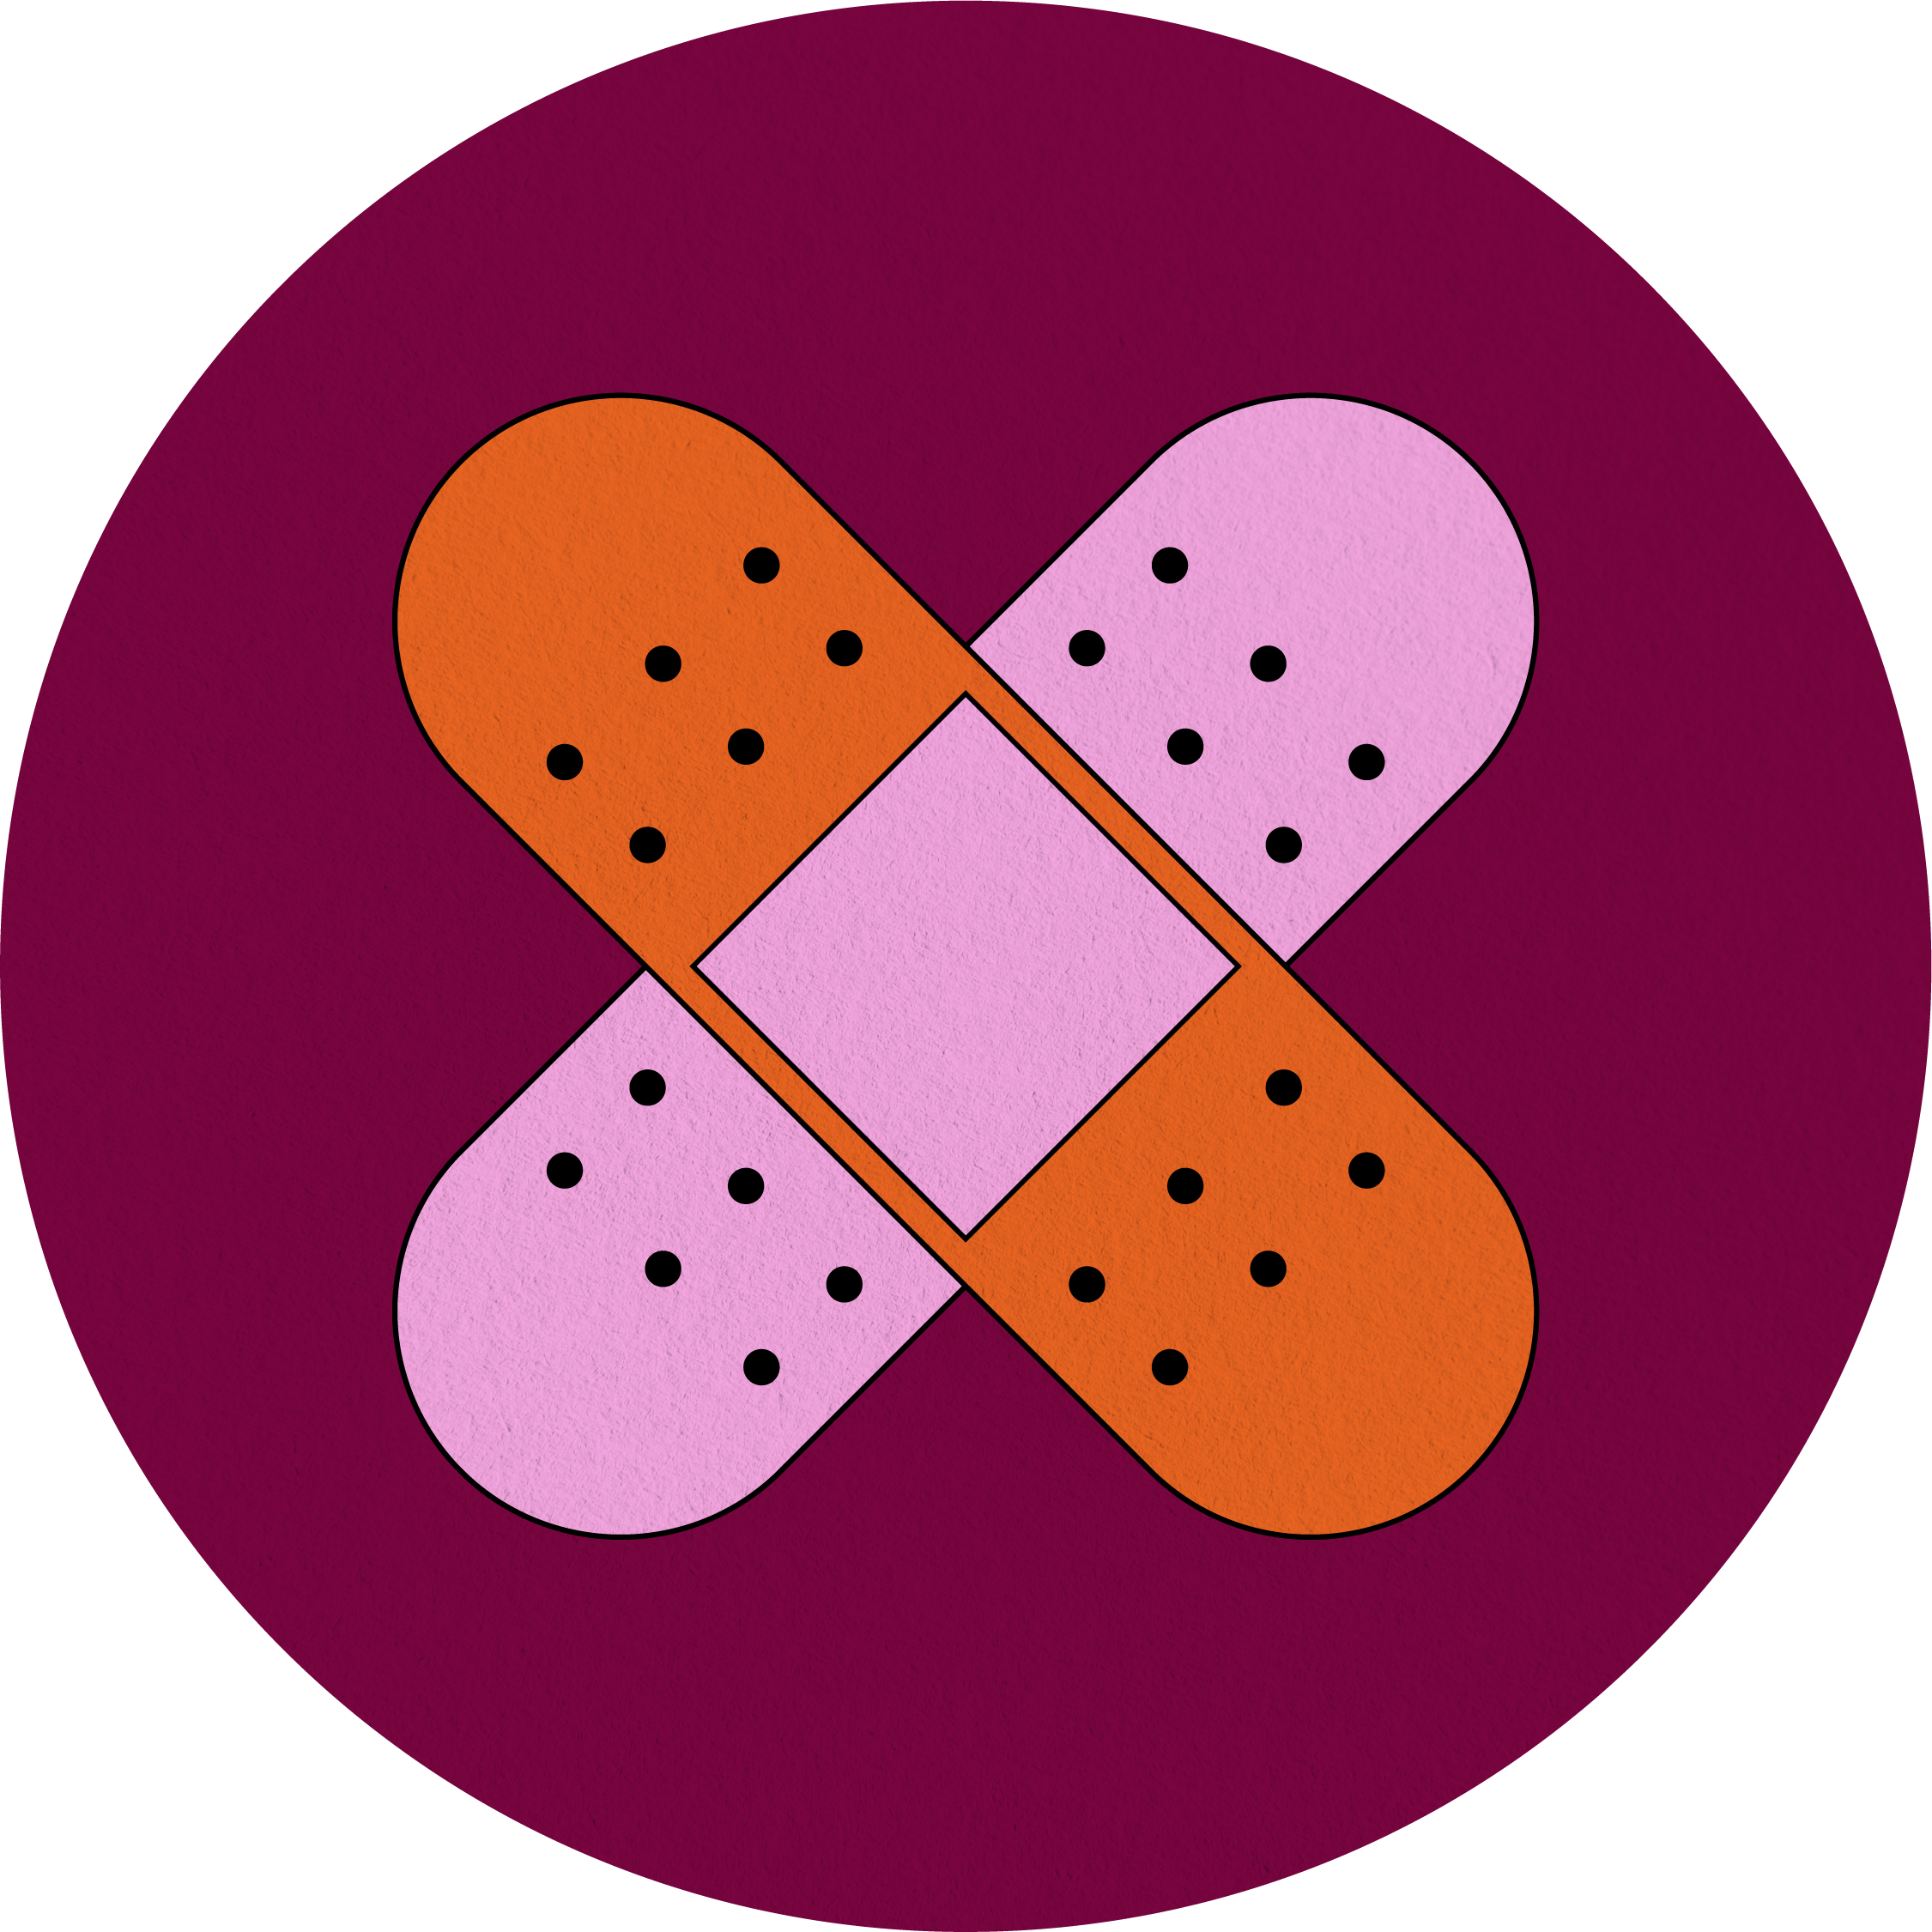 Illustration of two criss-crossed bandages on purple background.